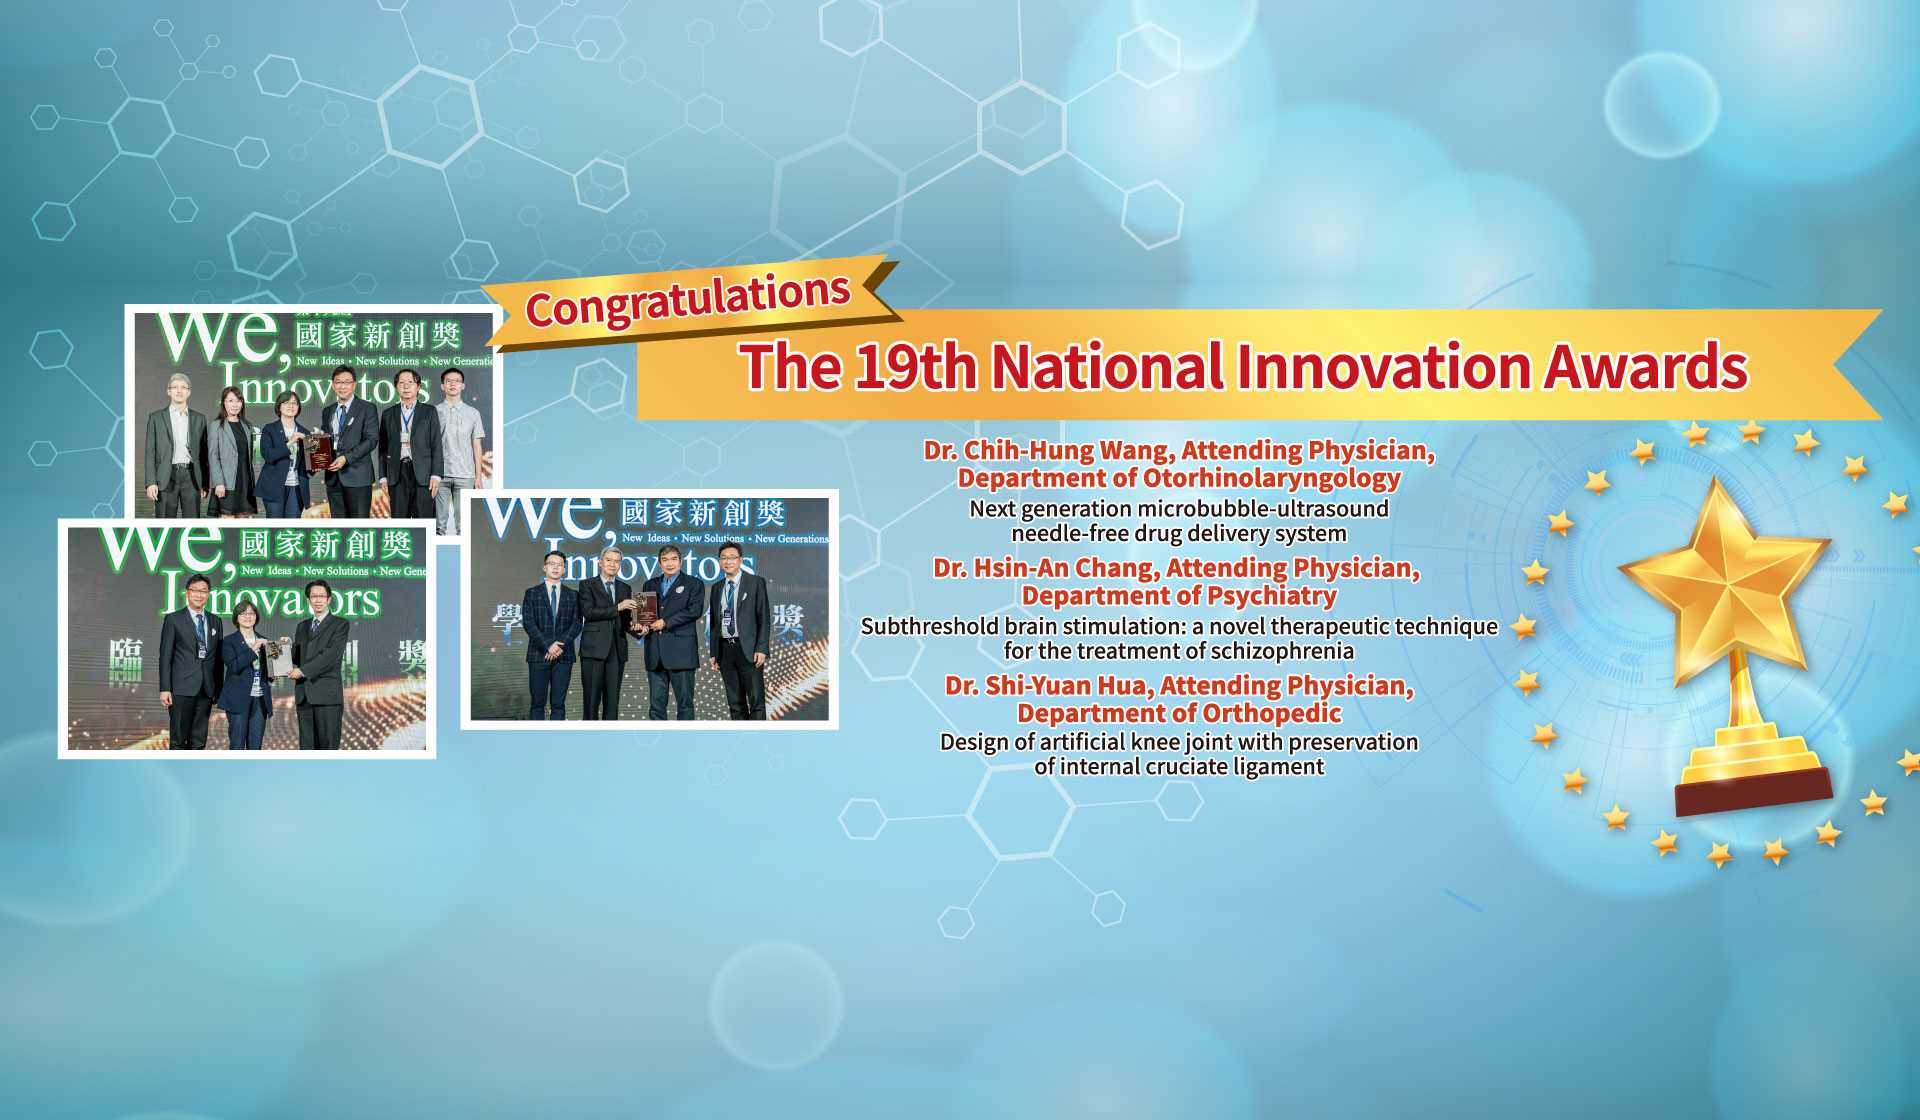 Certipicqate_of_19th_National_Innovaqtion_Awards